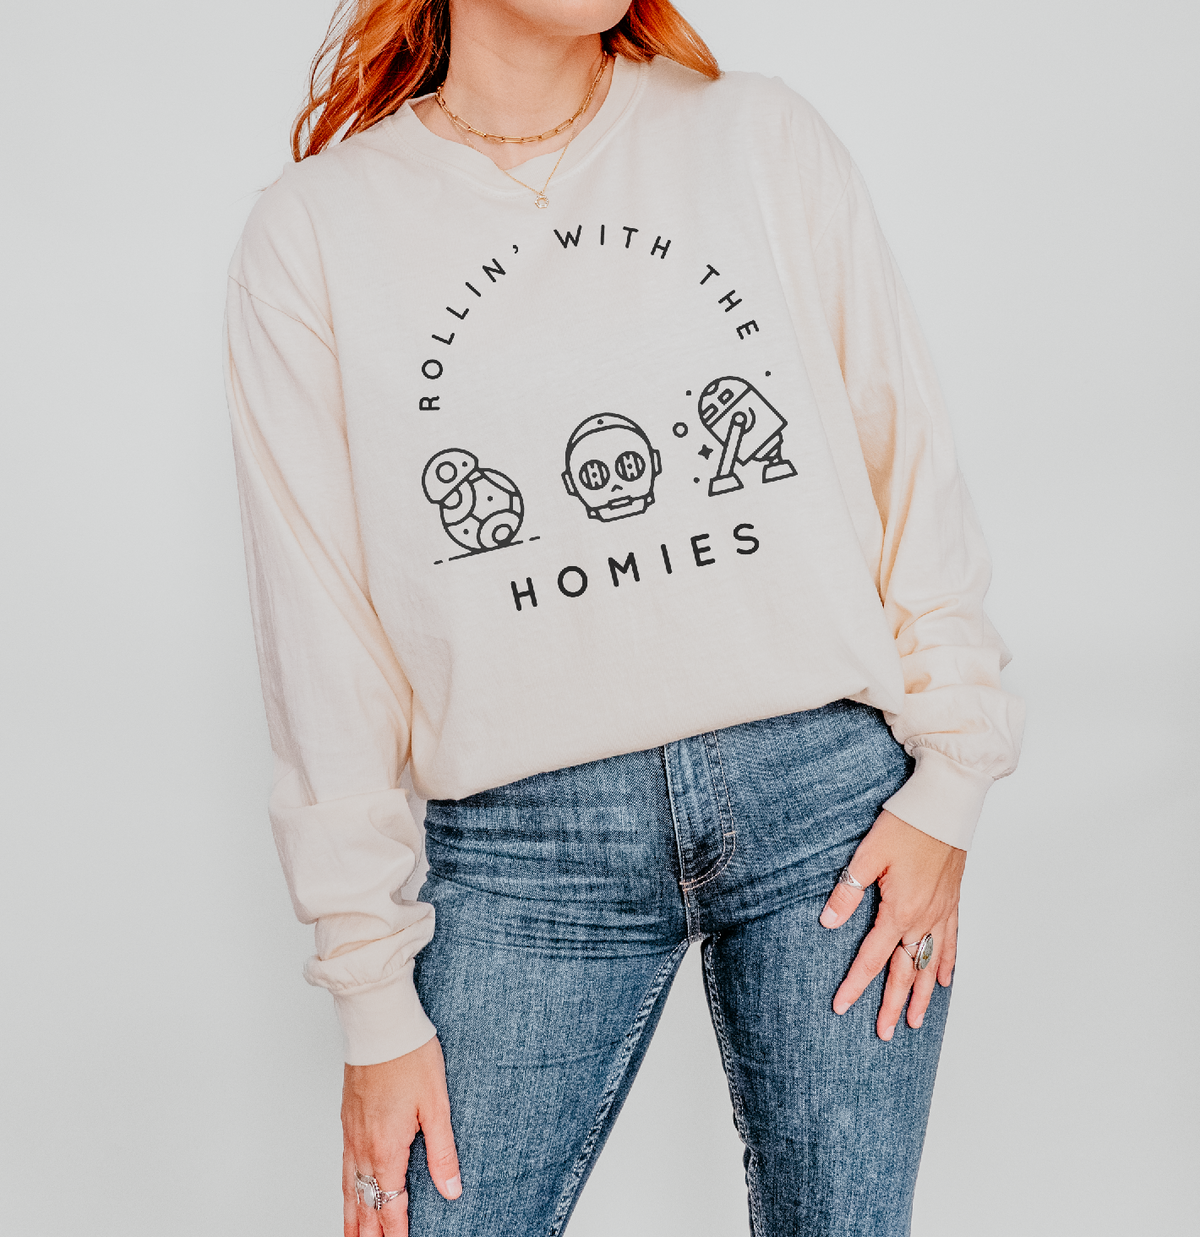 Rollin’ With The Homies Comfort Colors Unisex Garment-dyed Long Sleeve T-Shirt